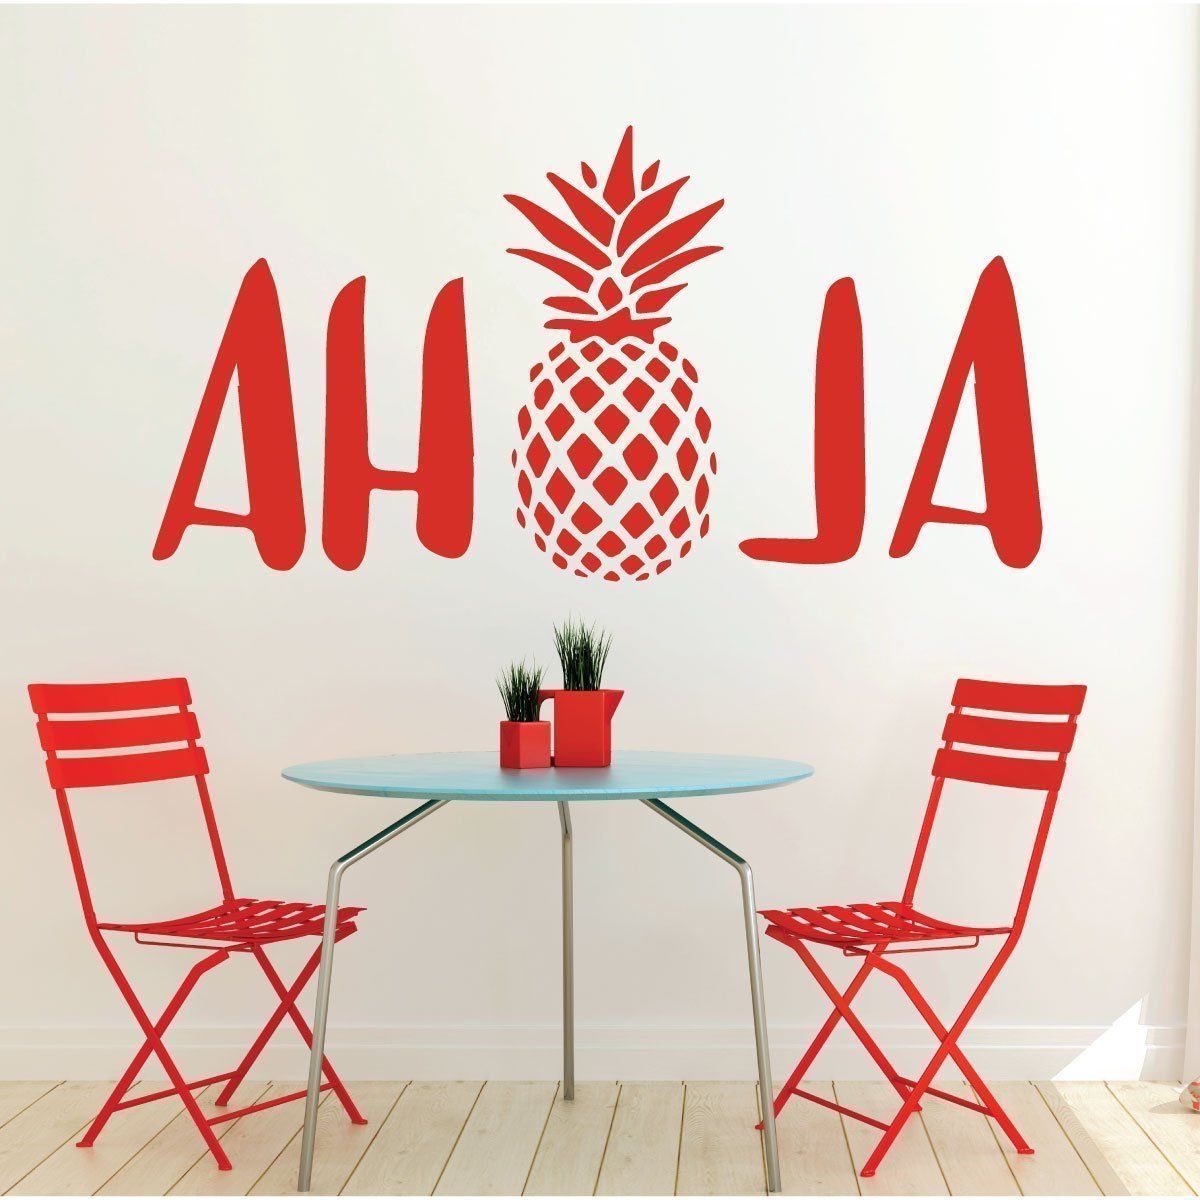 Aloha Wall Decal Sticker With Hawaiian Pineapple Design Intended For Best And Newest Hawaii Wall Art (View 16 of 20)